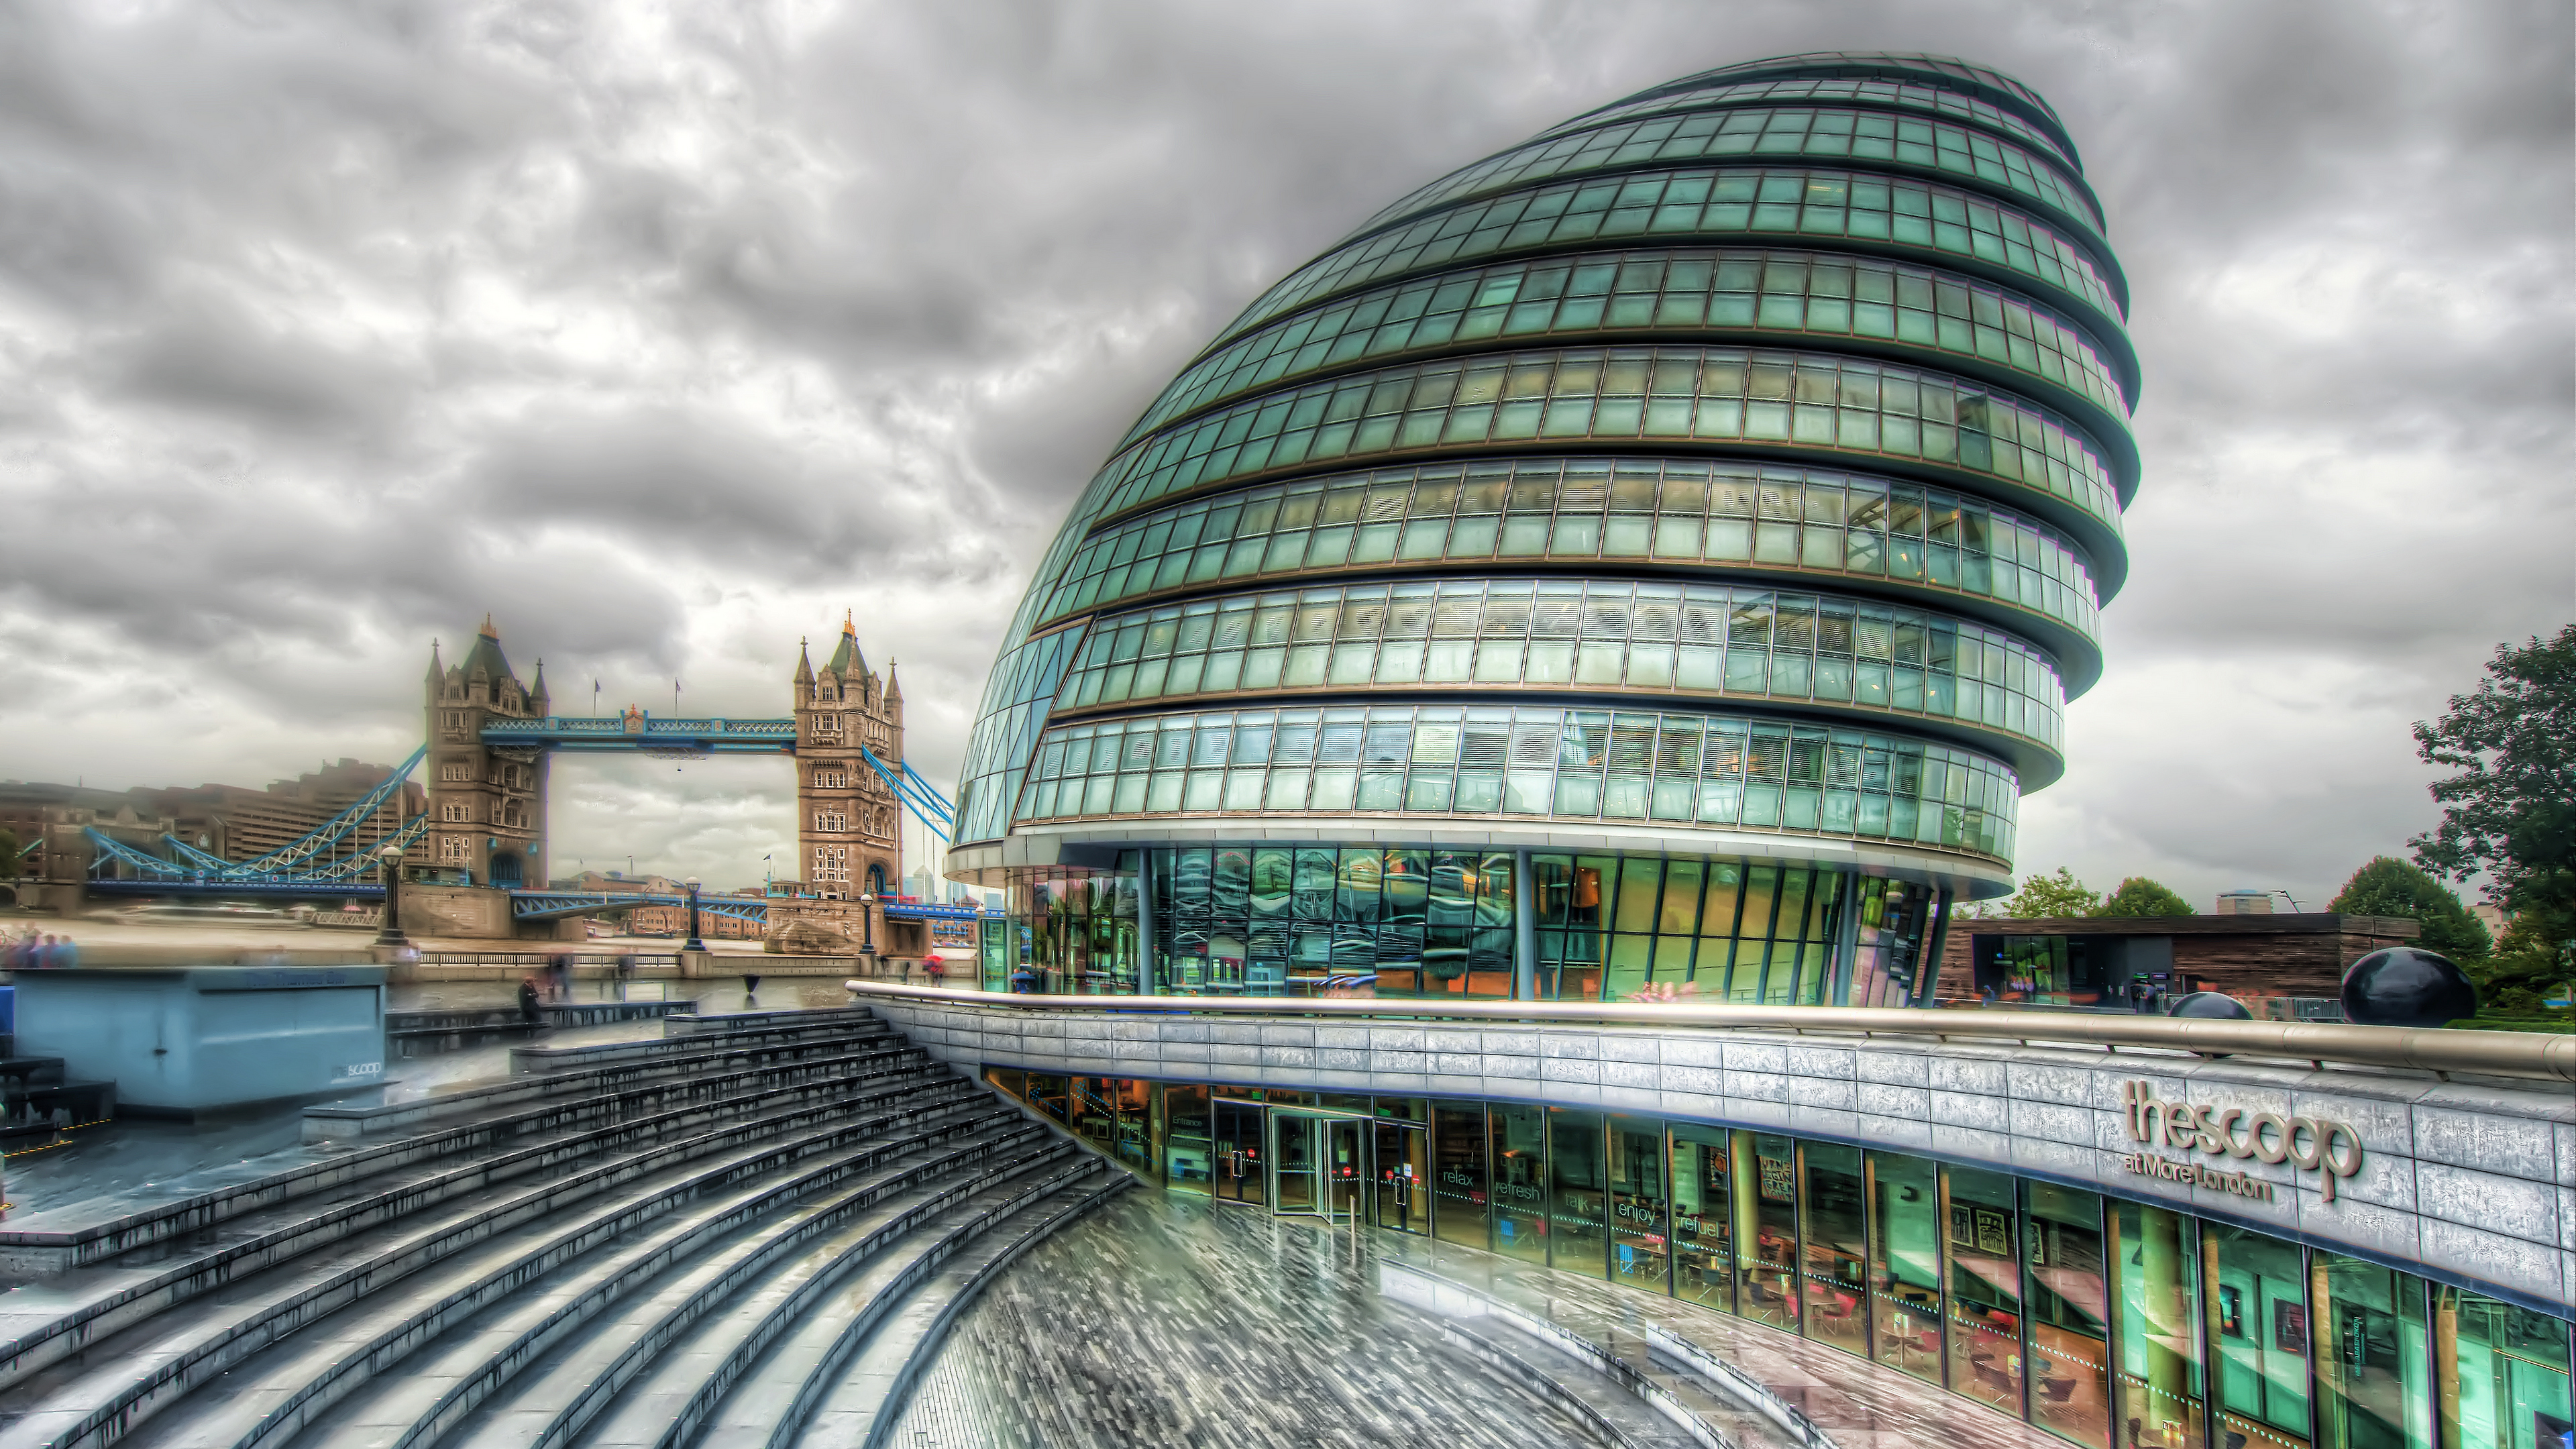 General 3840x2160 Trey Ratcliff photography 4K UK England London cityscape Leaning Tower of London building city